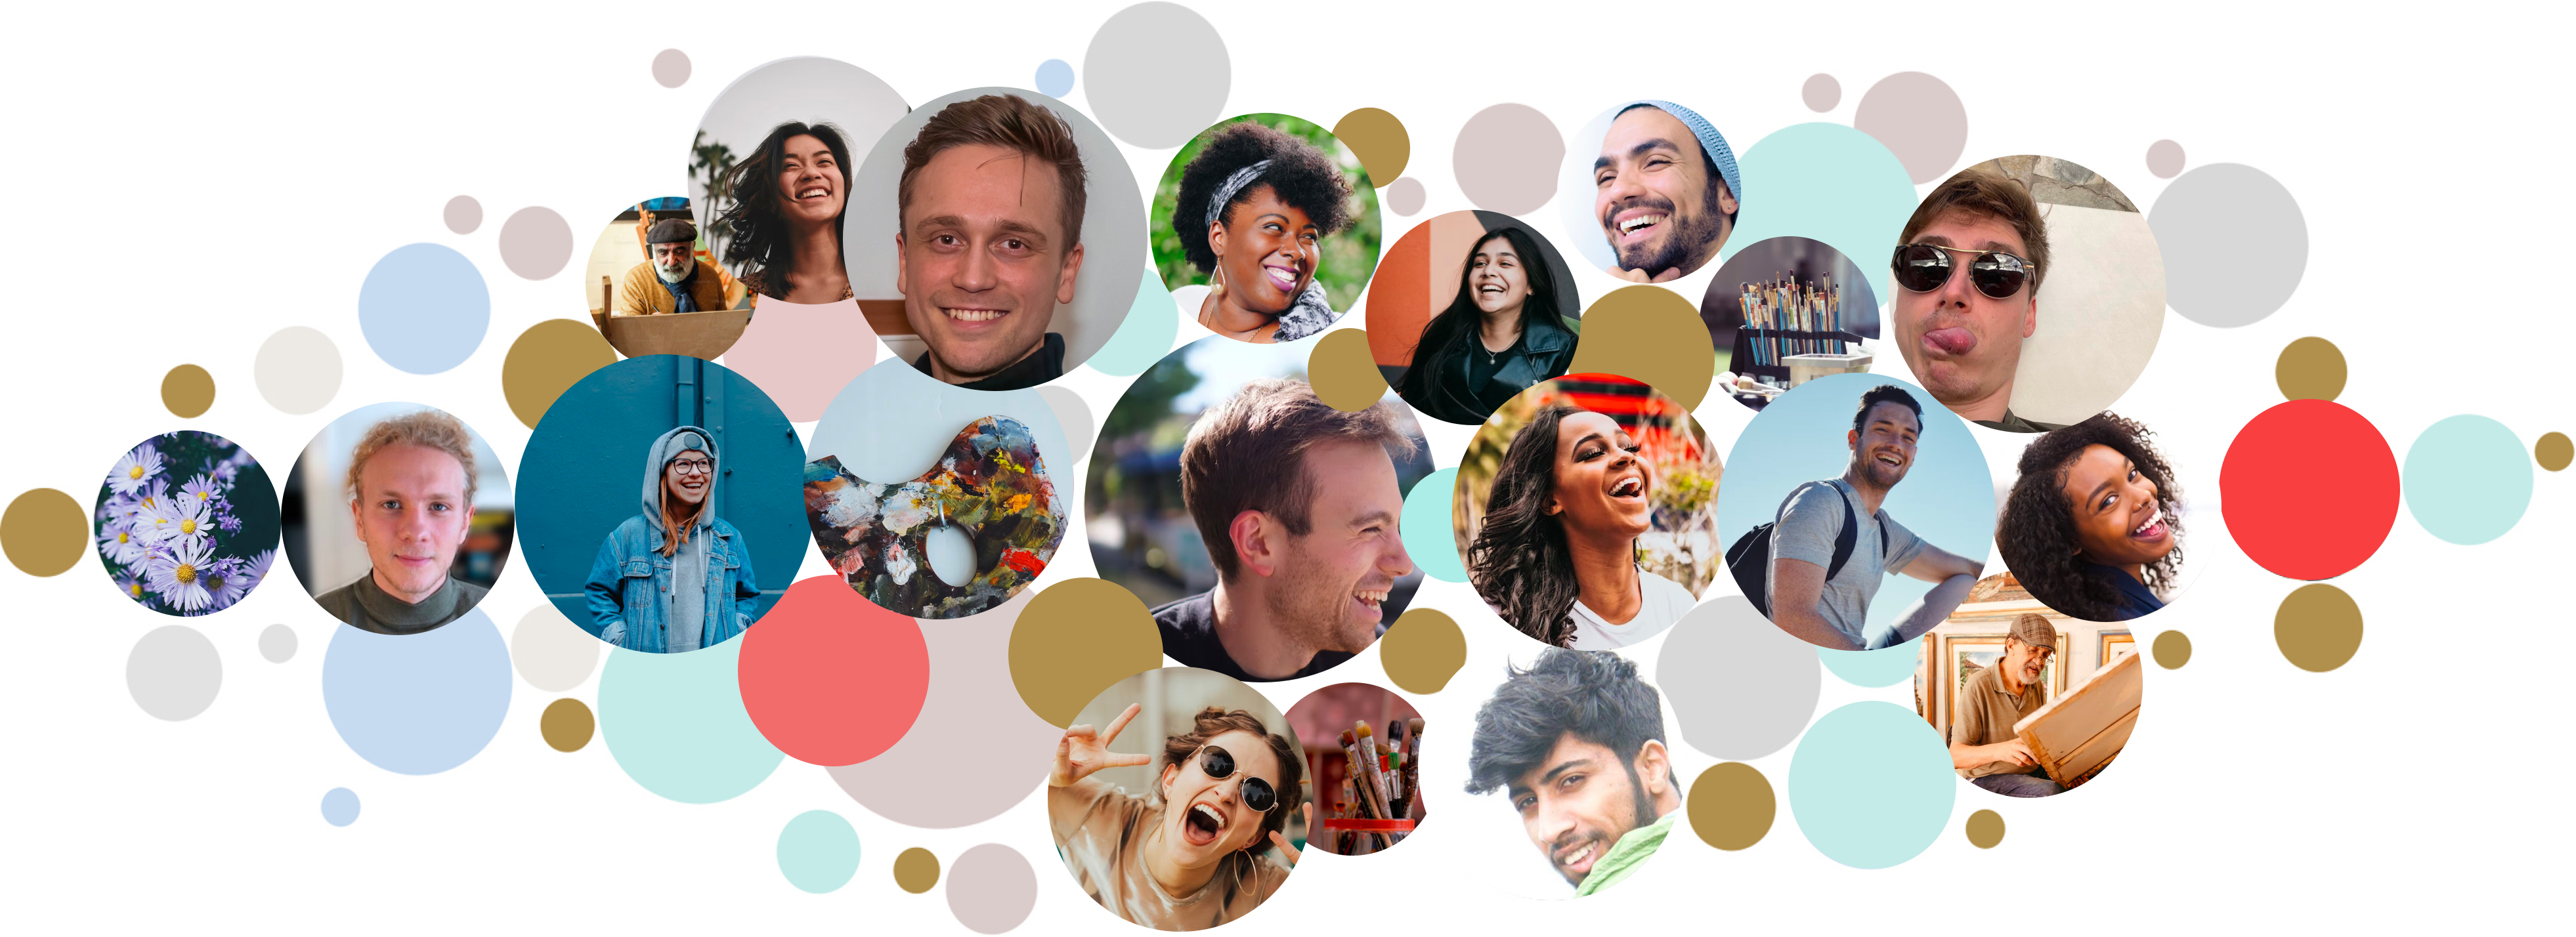 a collection of circular images showing faces of people of diverse ethnicities, representing the WePaint community